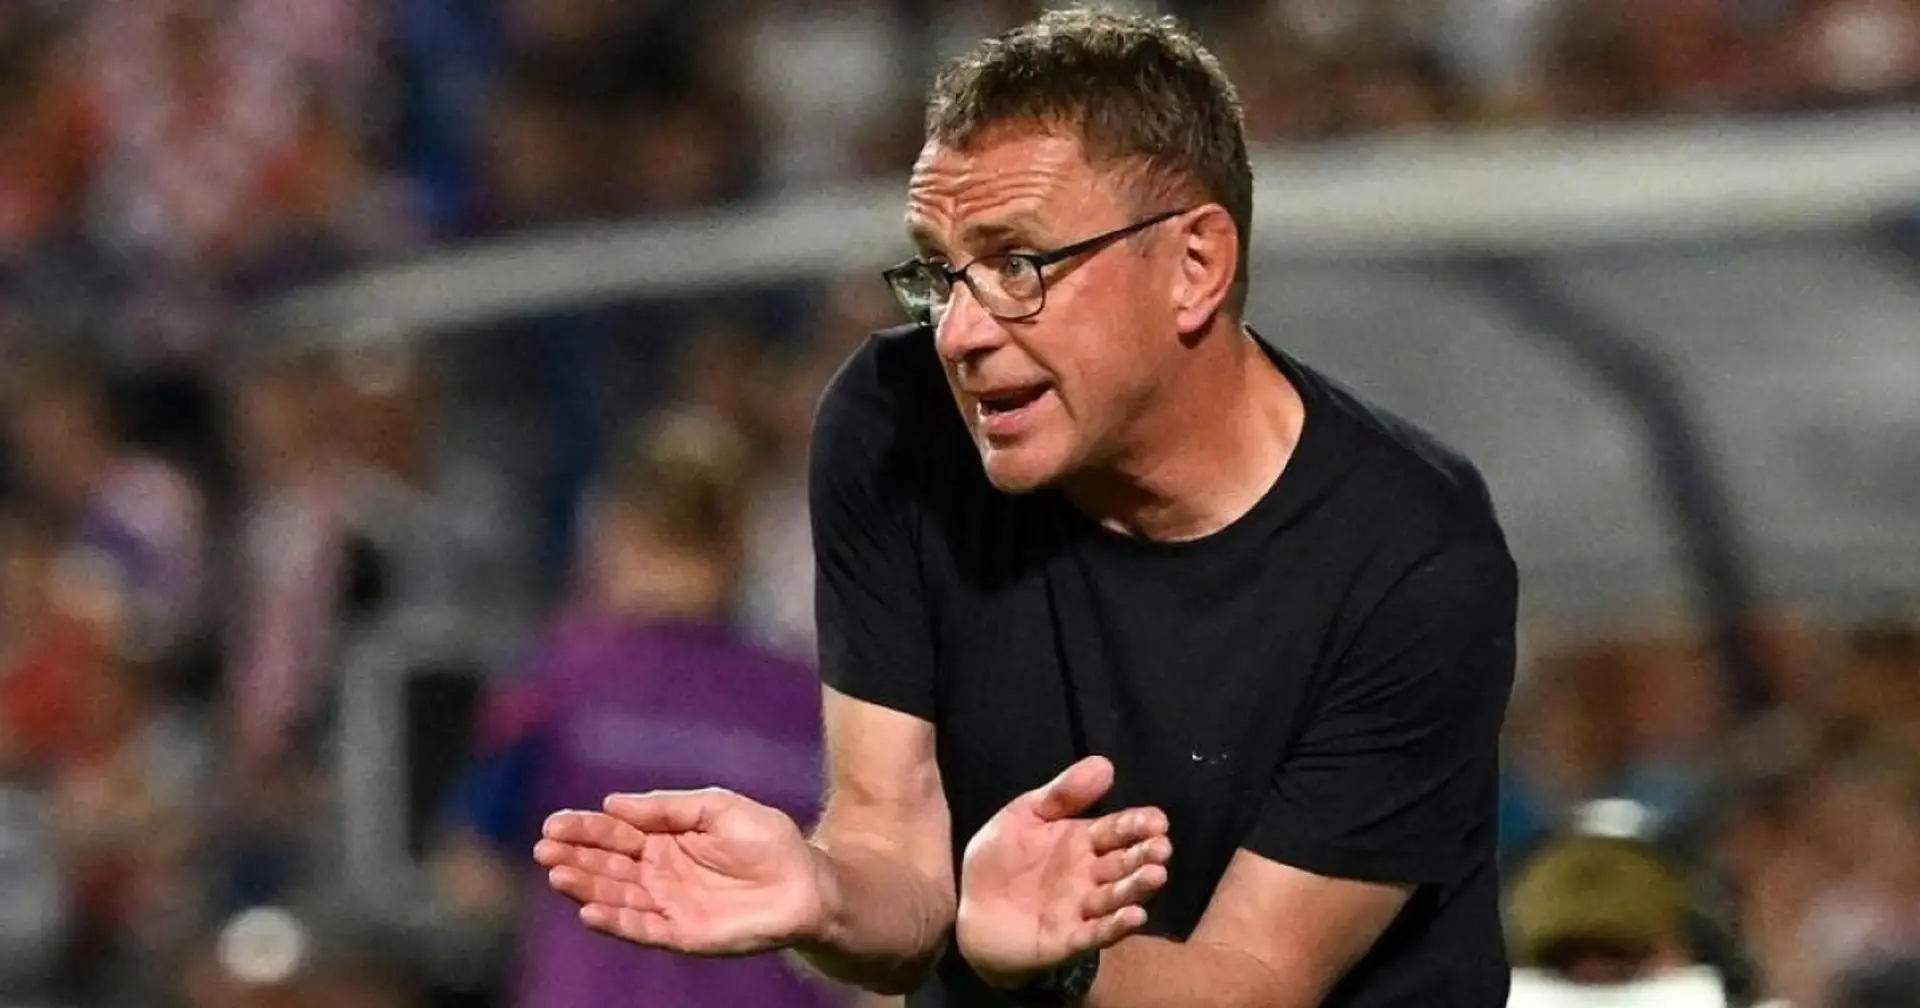 'I decided 14 months ago': Ralf Rangnick on offer to take over Germany job